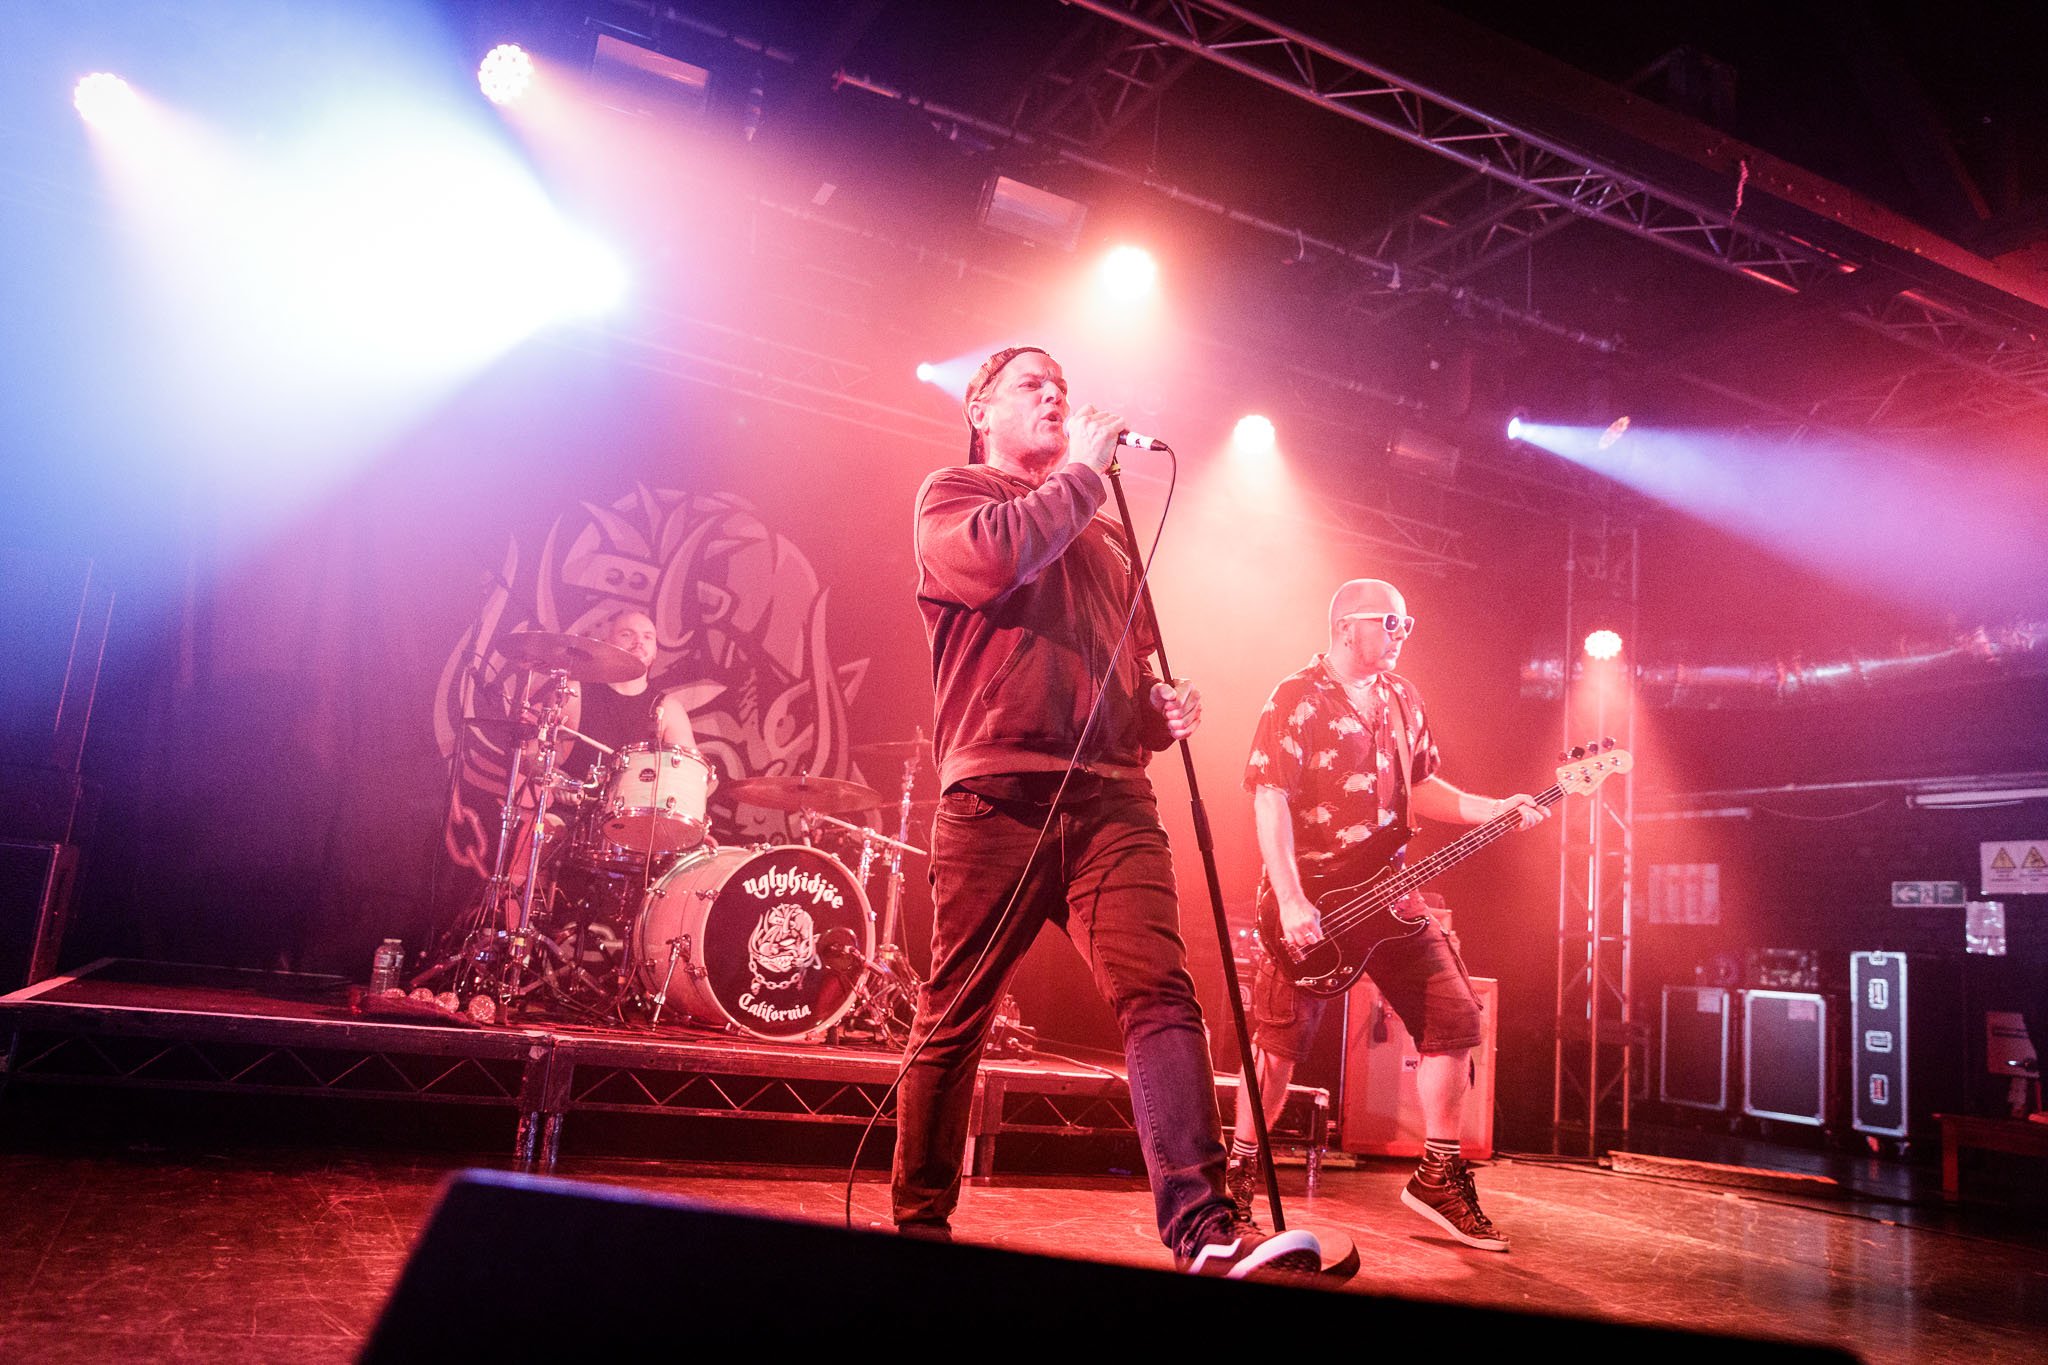 Ugly Kid Joe at the O2 Academy in Liverpool on November 3rd 2022